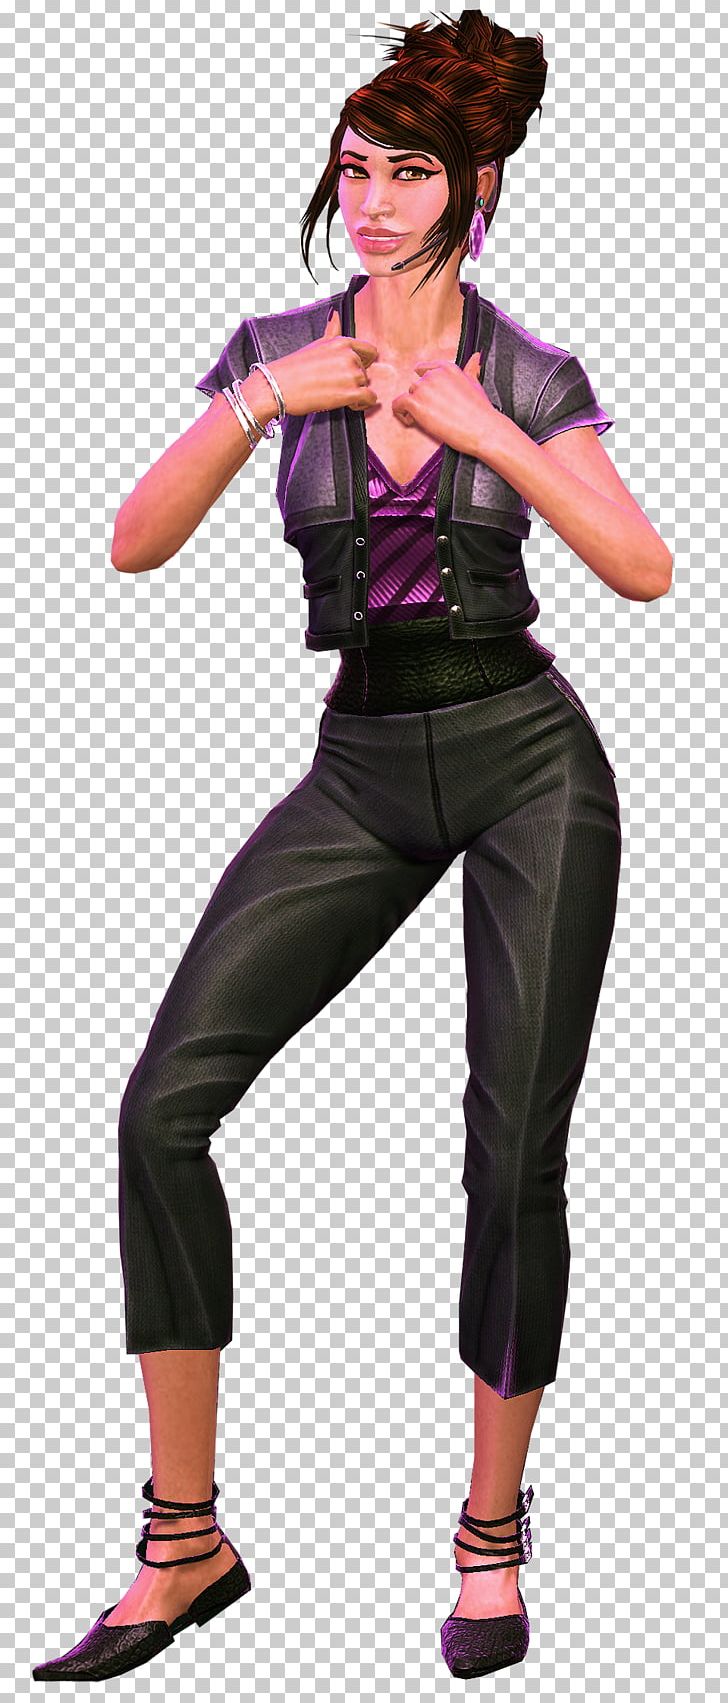 Dance Central 3 Dance Central 2 Wikia Video Game PNG, Clipart, Audio, Costume, Dance Central, Dance Central 2, Dance Central 3 Free PNG Download